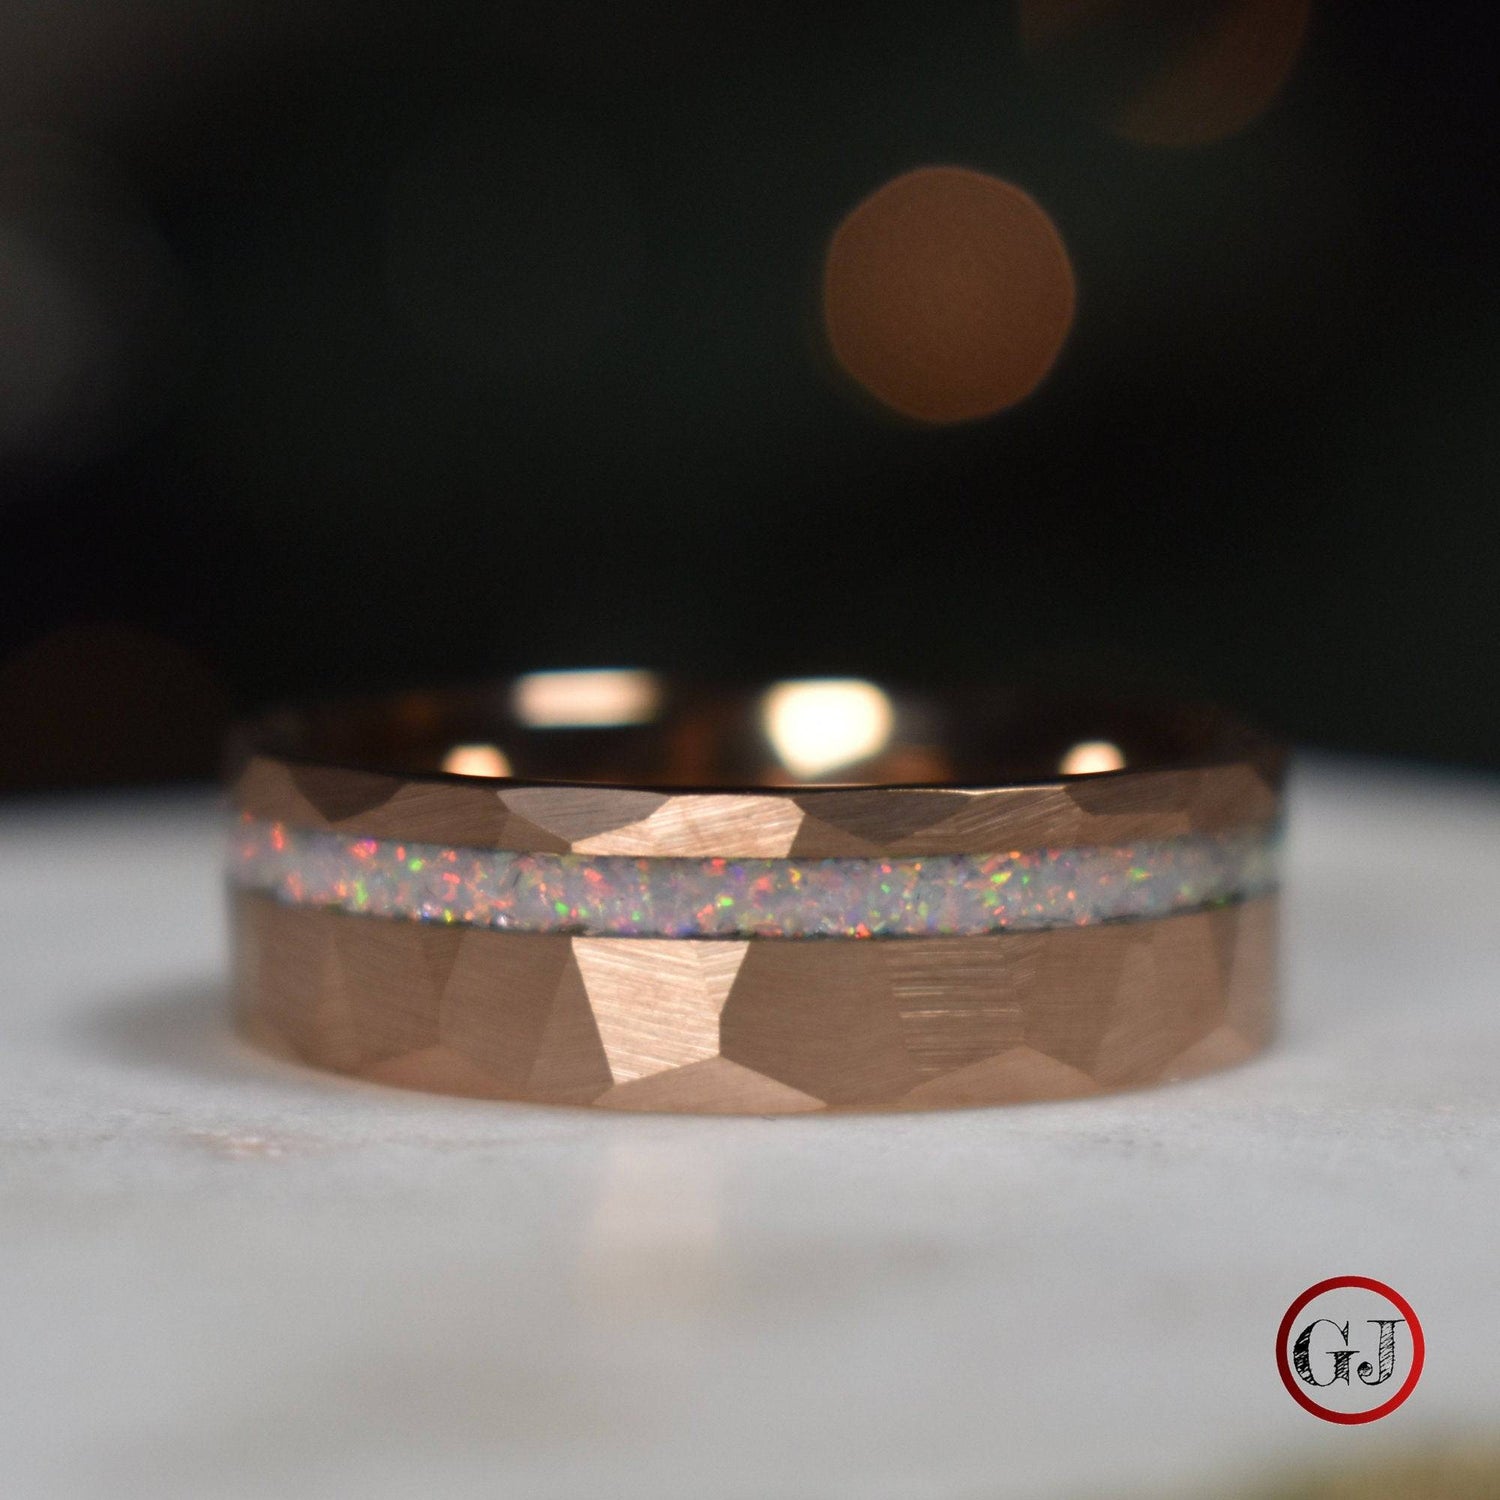 Tungsten 8mm Hammered Rose Gold Ring with Crushed Opal Centre - Tungsten Titans